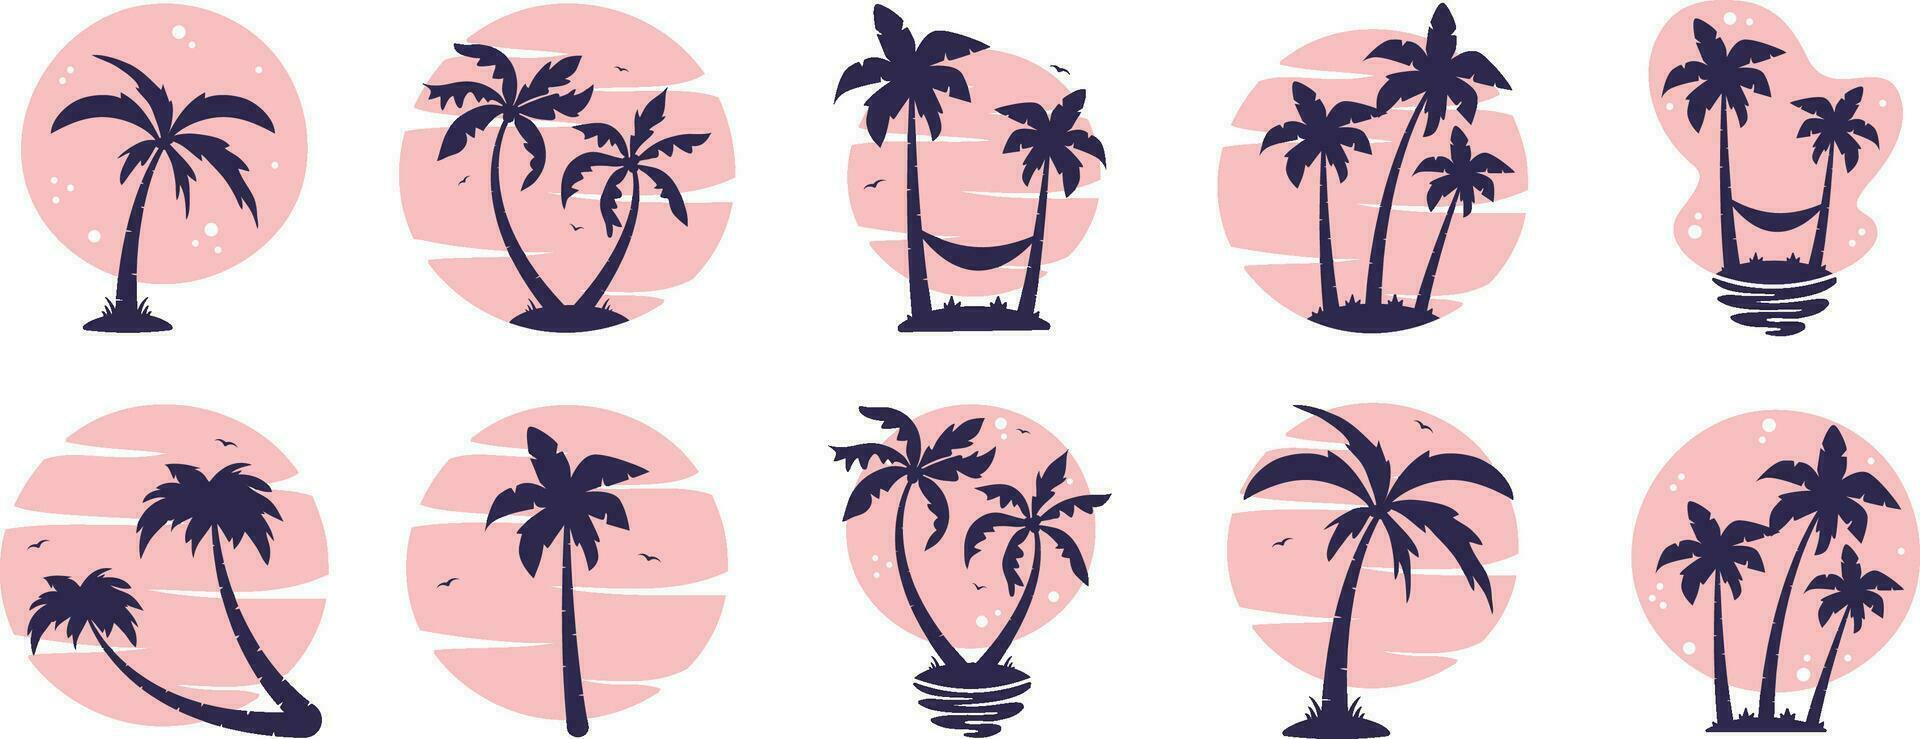 beach view with coconut trees silhouette vector